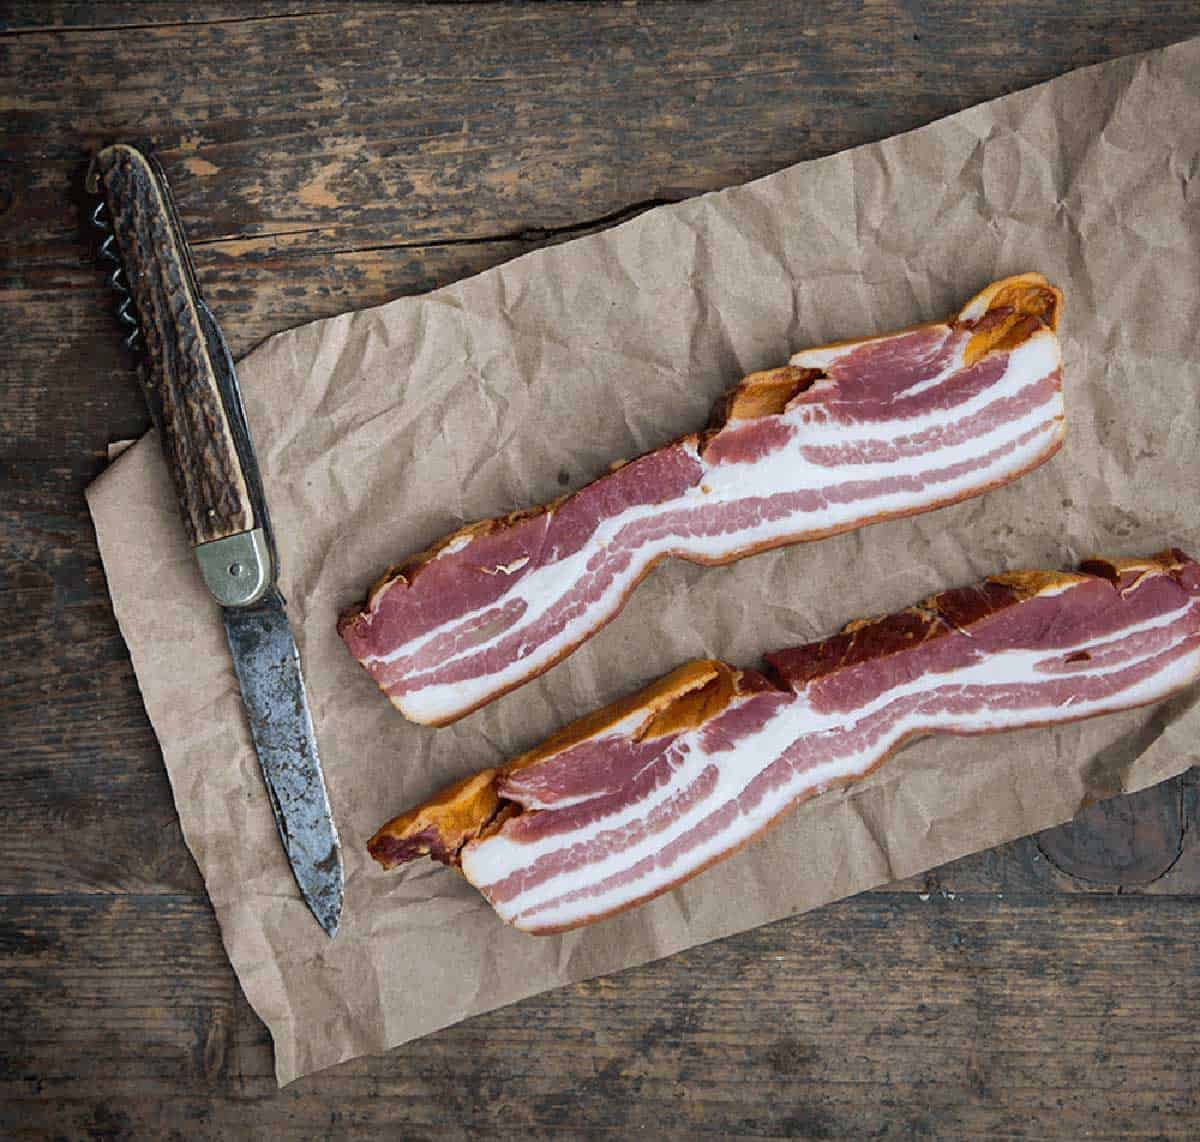 A slab of bacon on butcher paper with a knife.